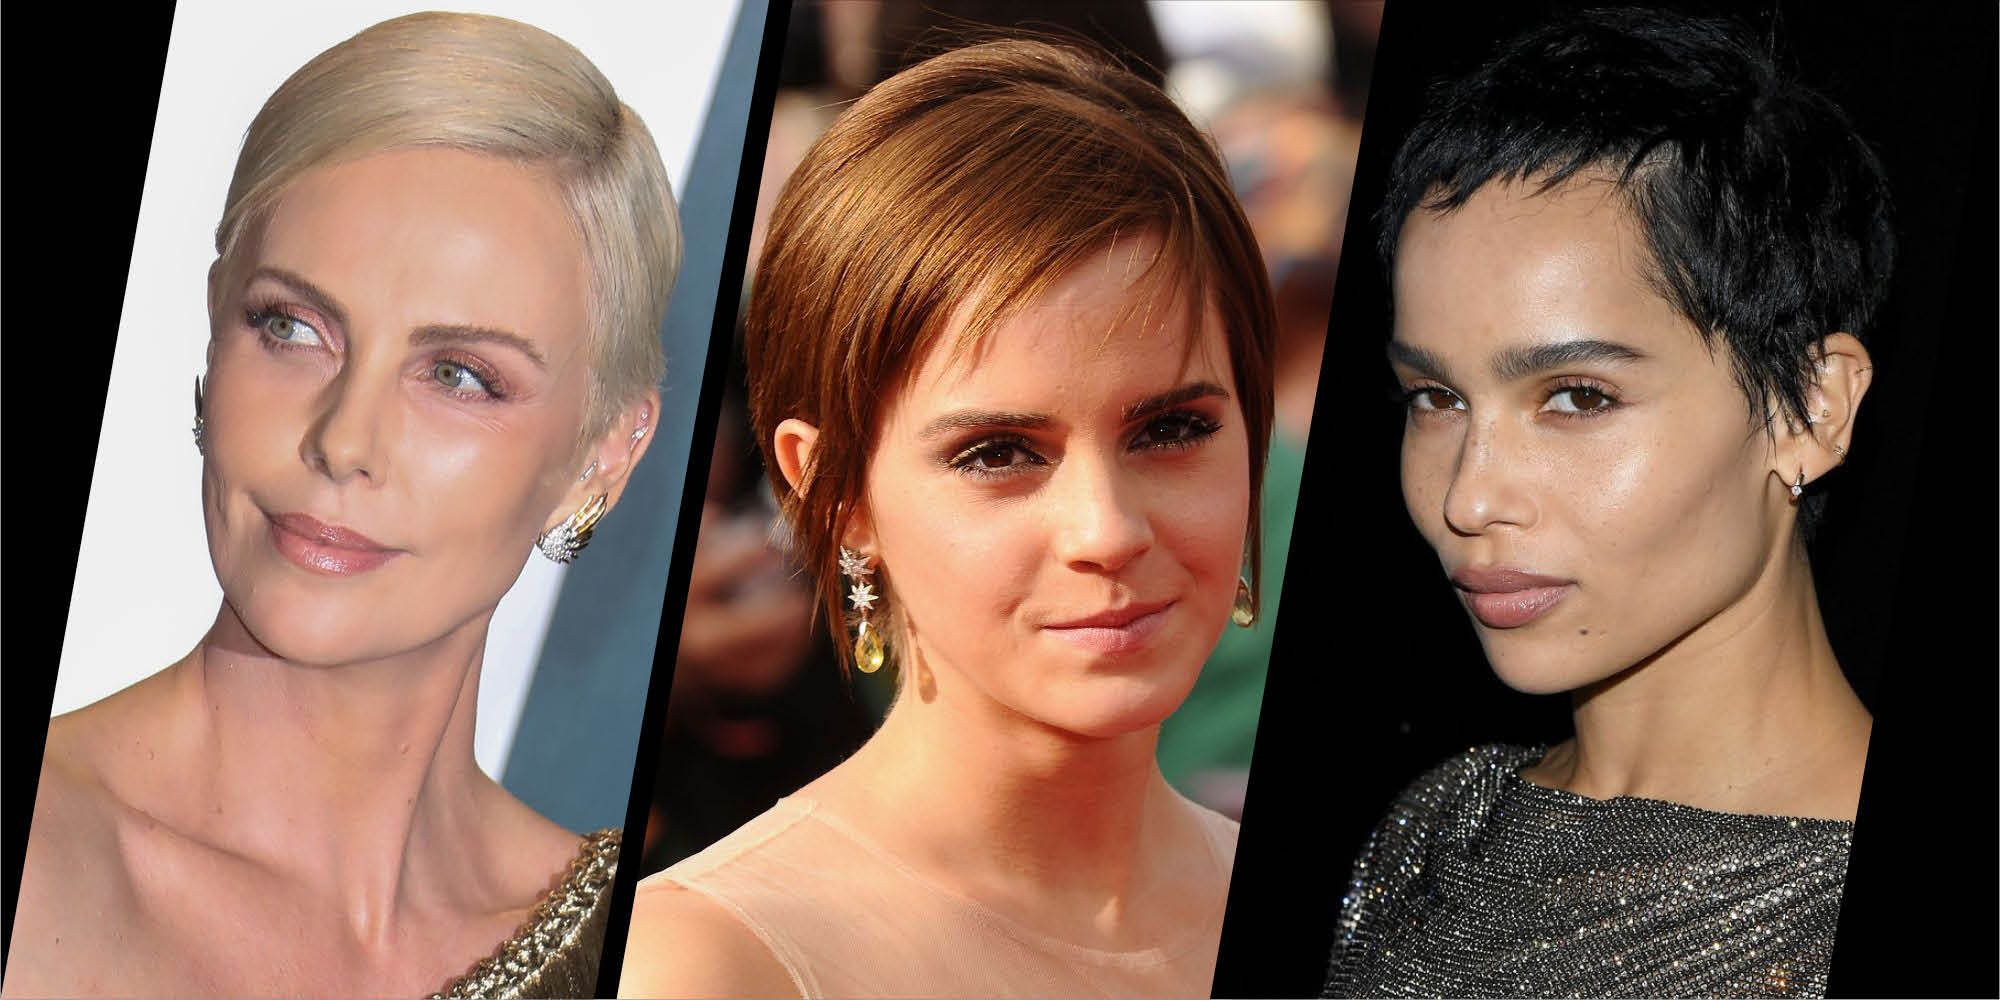 60 Short Bob Haircuts and Hairstyles for Women to Try in 2024